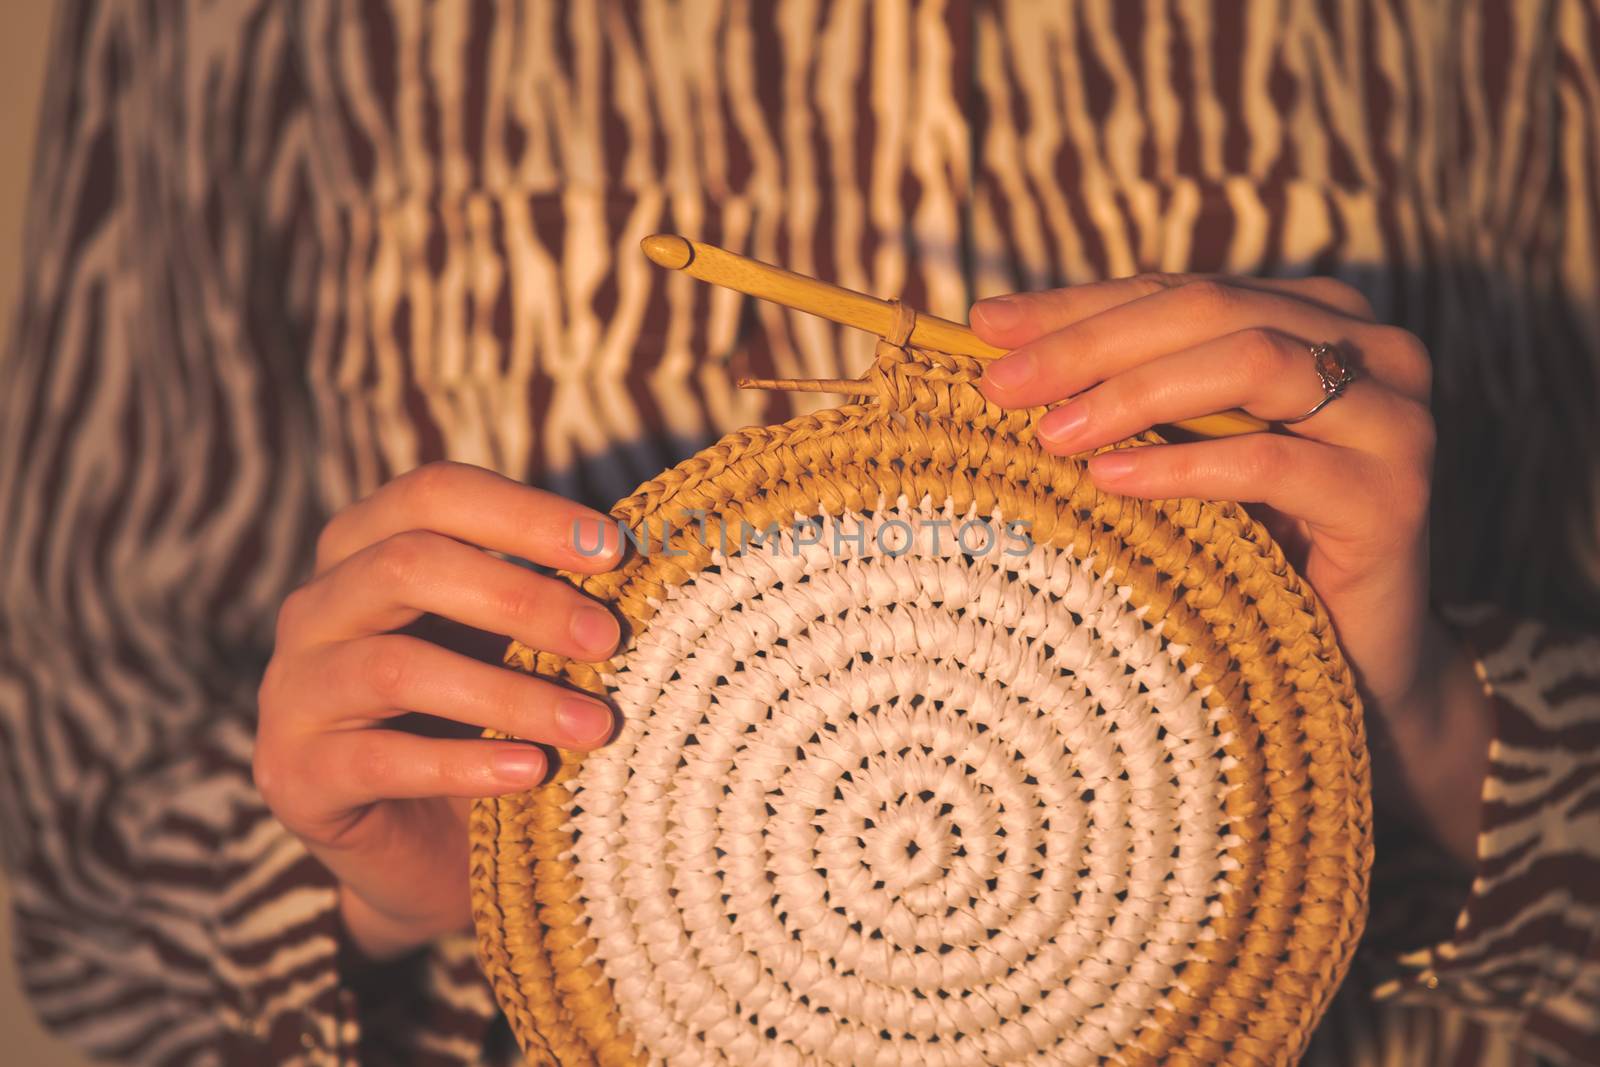 Round raffia crochet panno in female hands. Handcraft, hobby concept: holding a wall hanging and a crochet hook